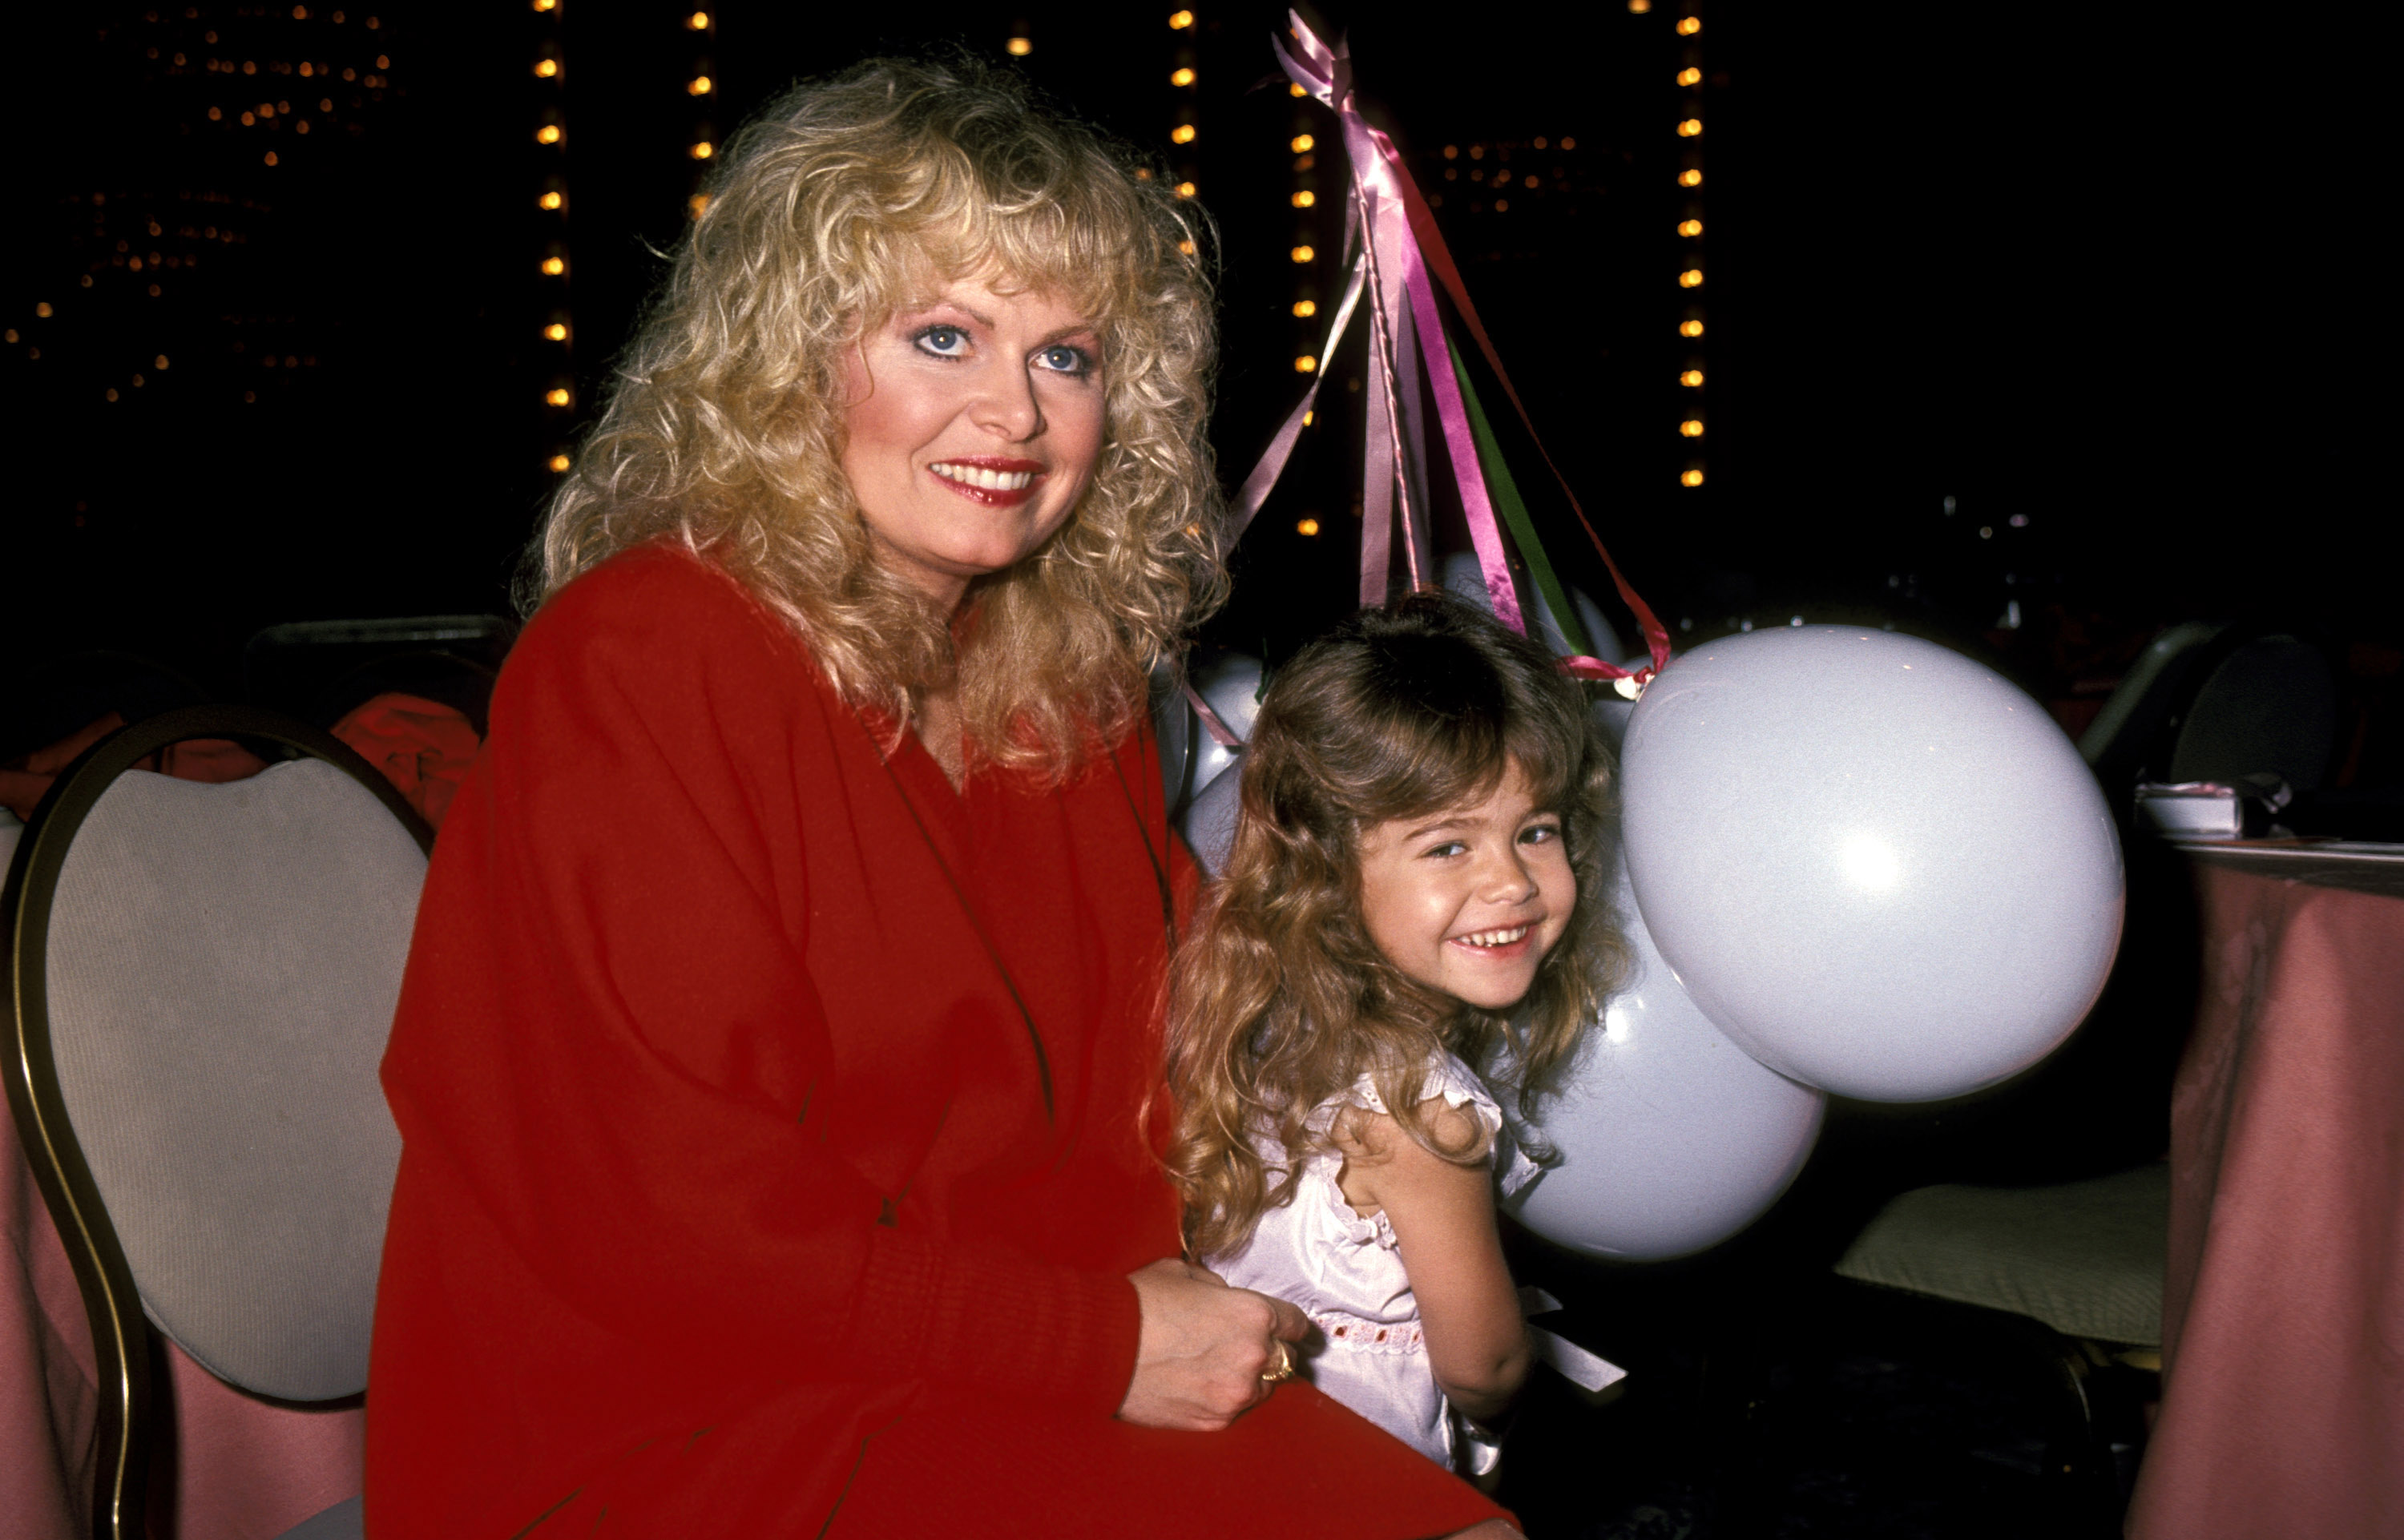 Sally Struthers and her daughter, Samantha, at the Young Musicians Foundation Celebrity Mother-Daughter Fashion Show, 1983 | Source: Getty Images